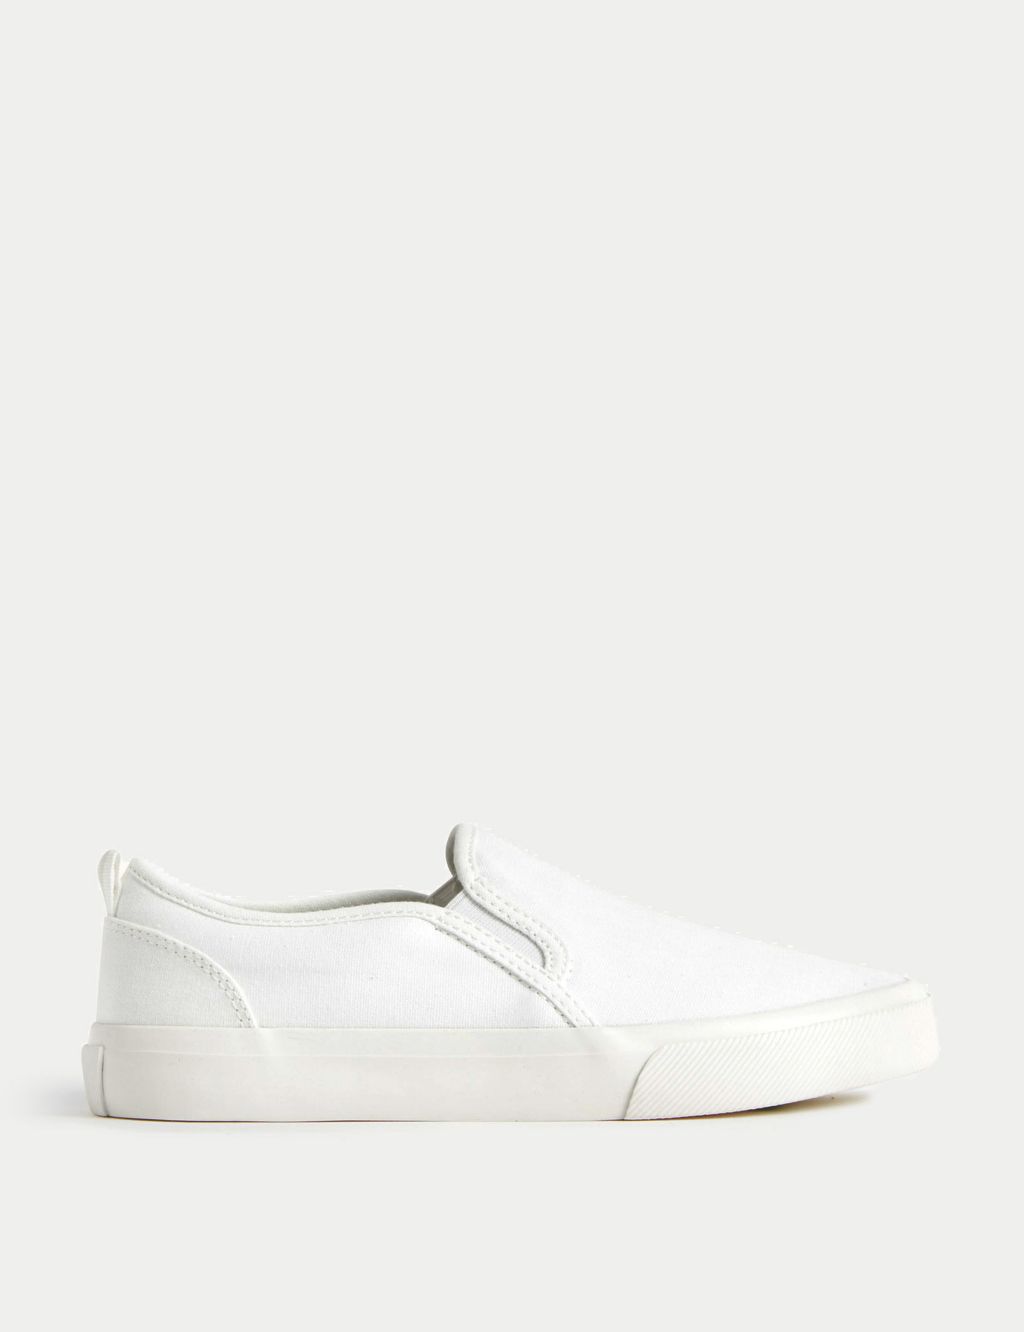 Canvas Slip On Trainers image 1